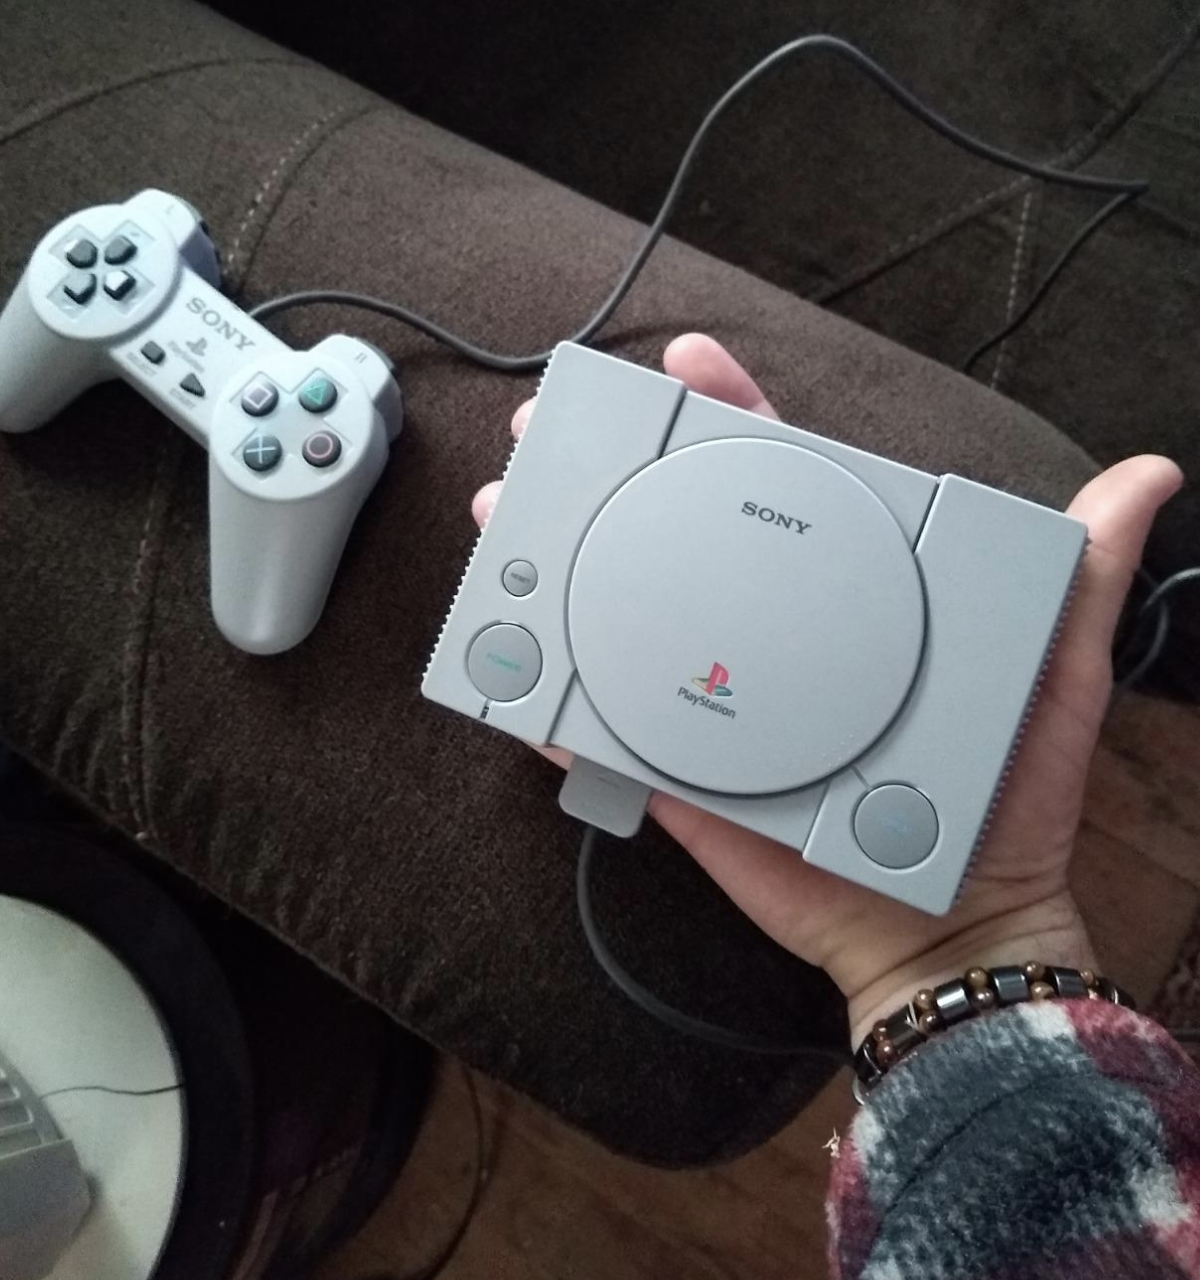 hand holding the compact console containing the games with a normal controller